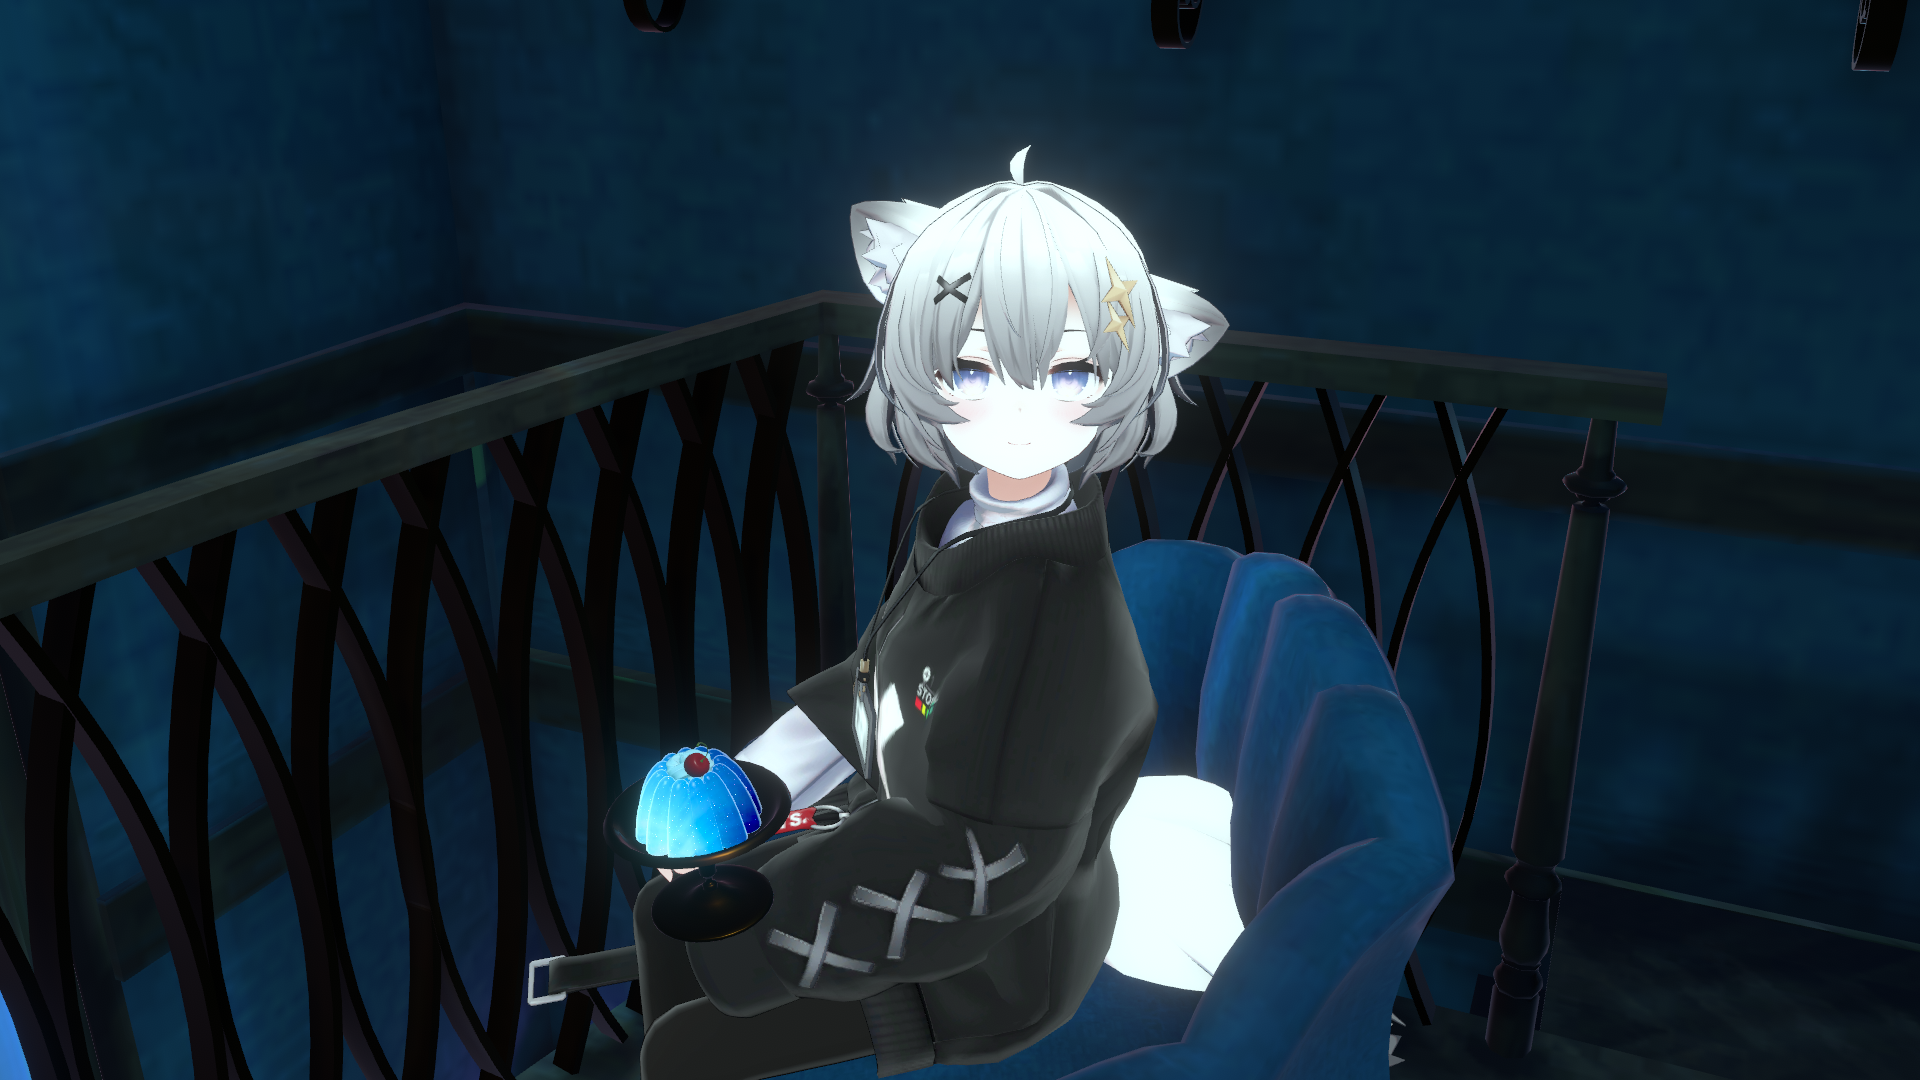 VRChat_1920x1080_2021-12-05_03-46-30.484.png